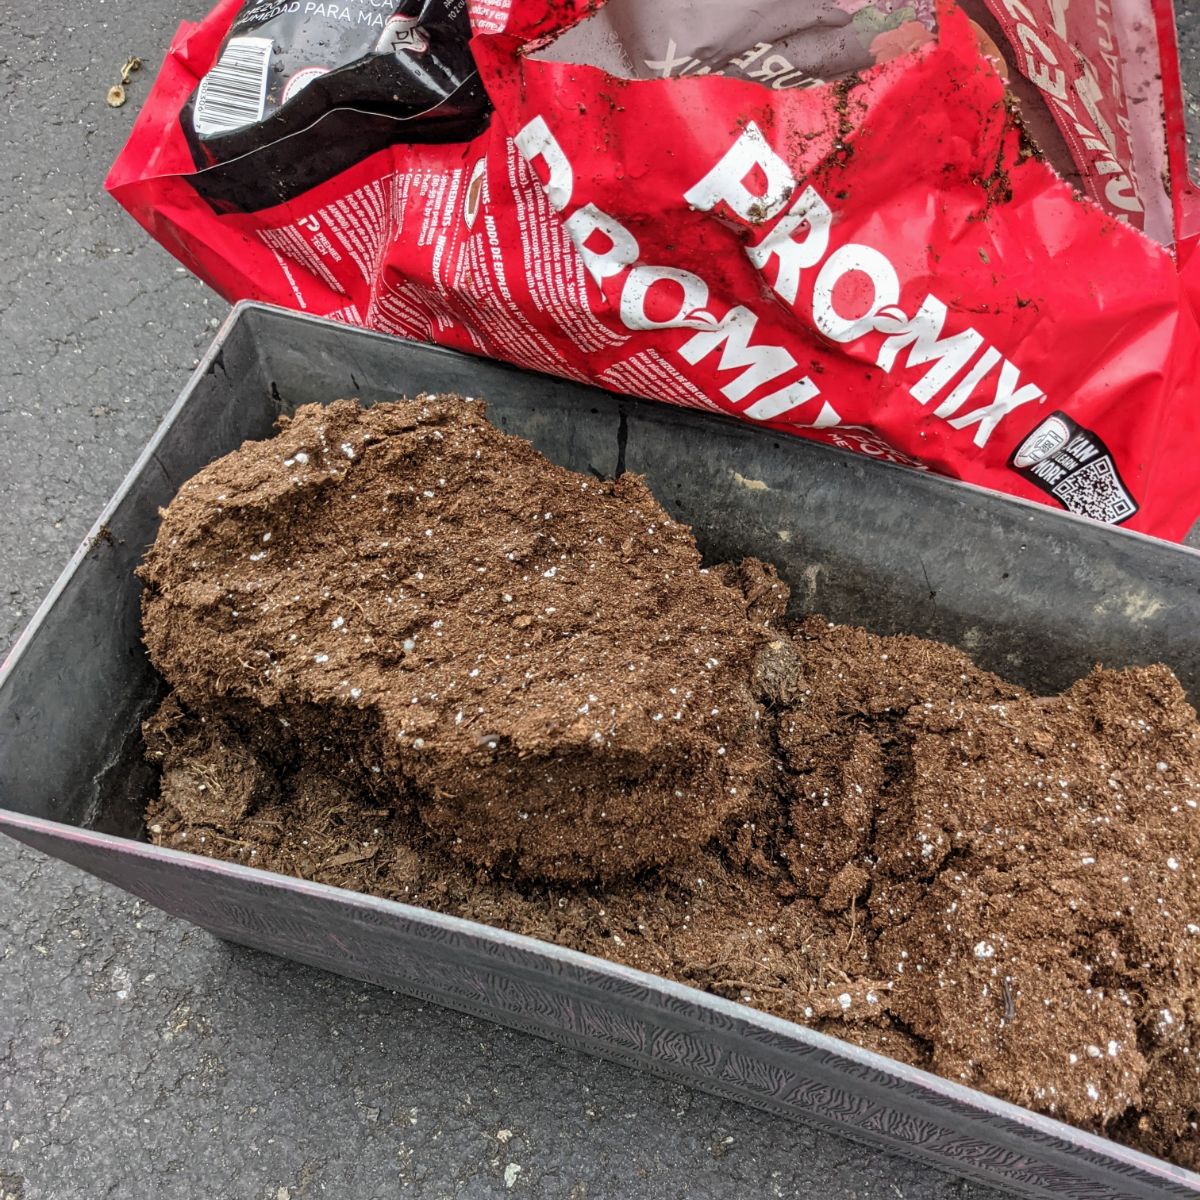 Pro Mix compressed potting soil moisture mix in the pink bag poured into a rectangular planter